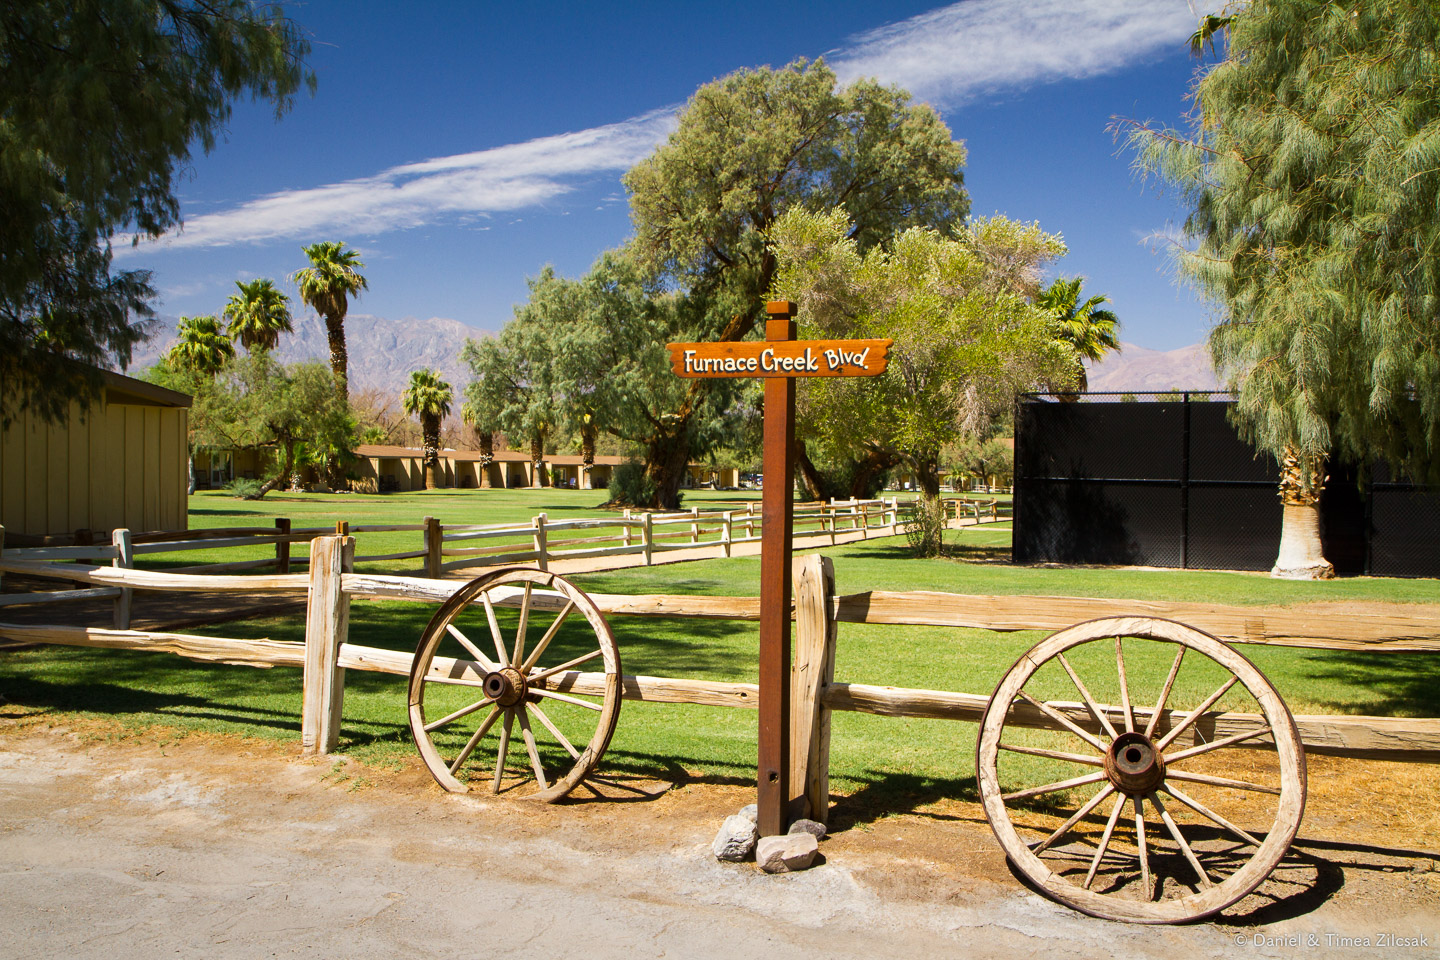 Furnace Creek Ranch, Death Valley National Park Top 10 Must See